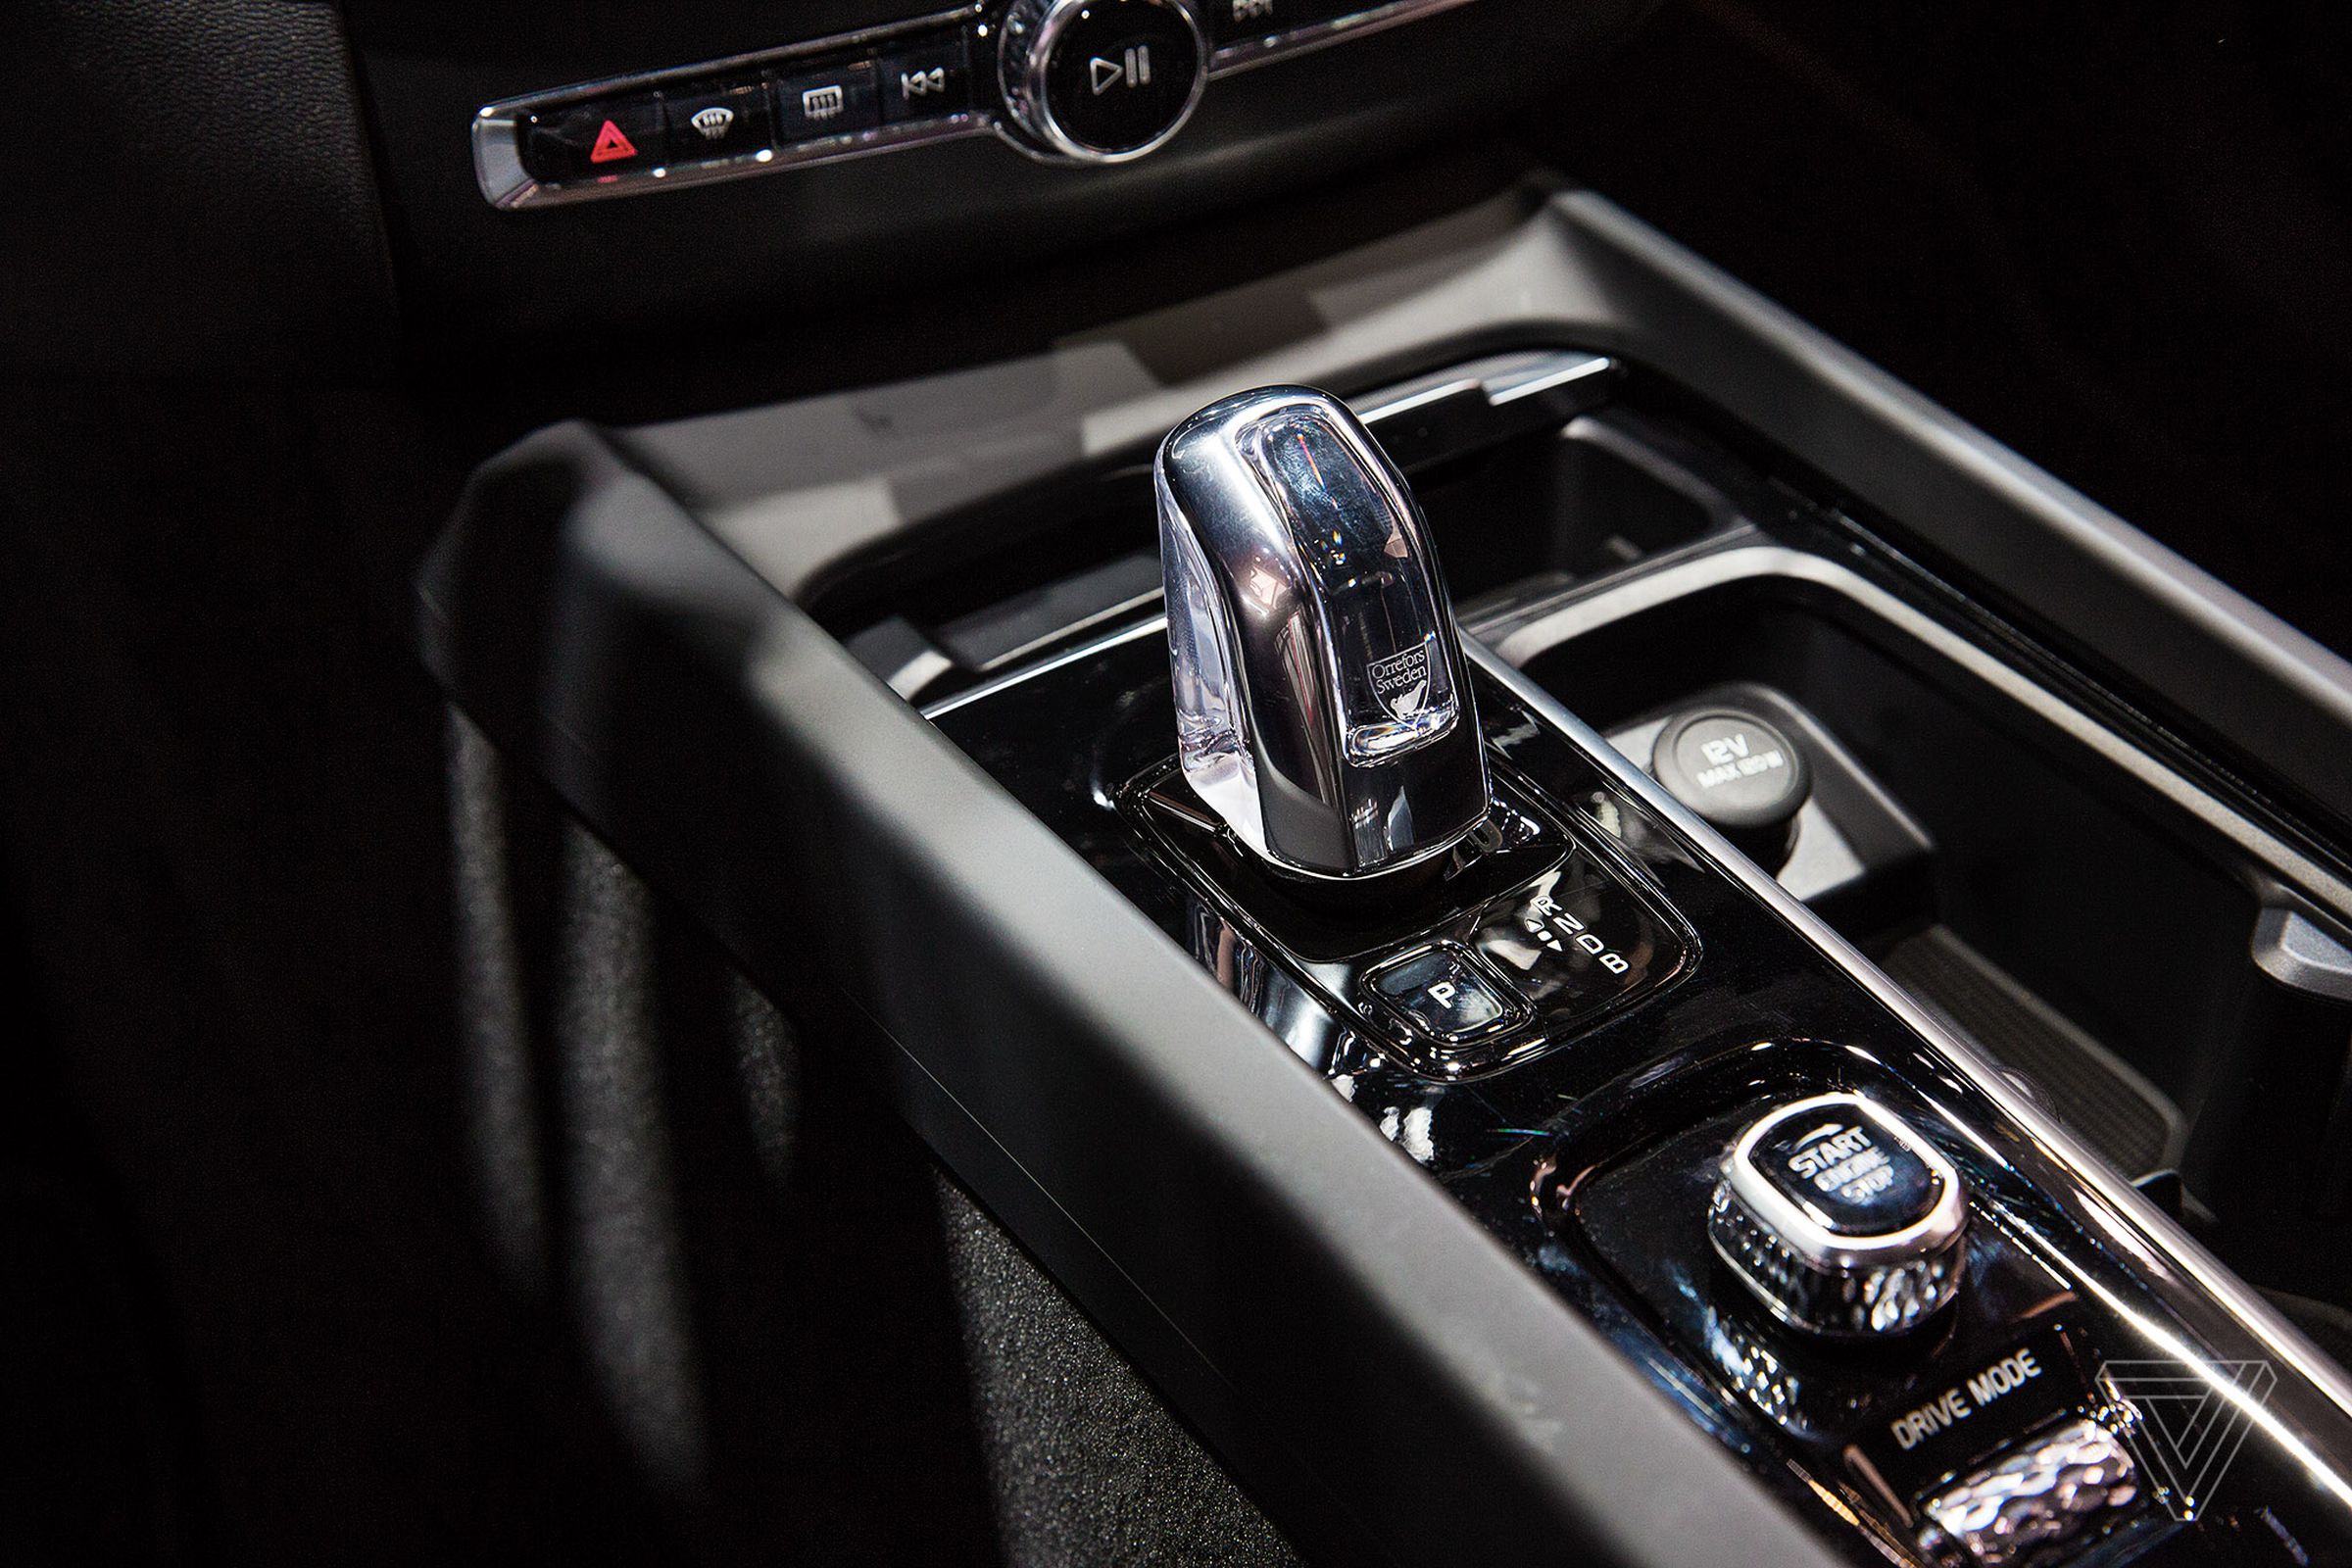 The award for most creative treatment of a gear shifter goes to the Volvo XC60, which is made of crystal glass.